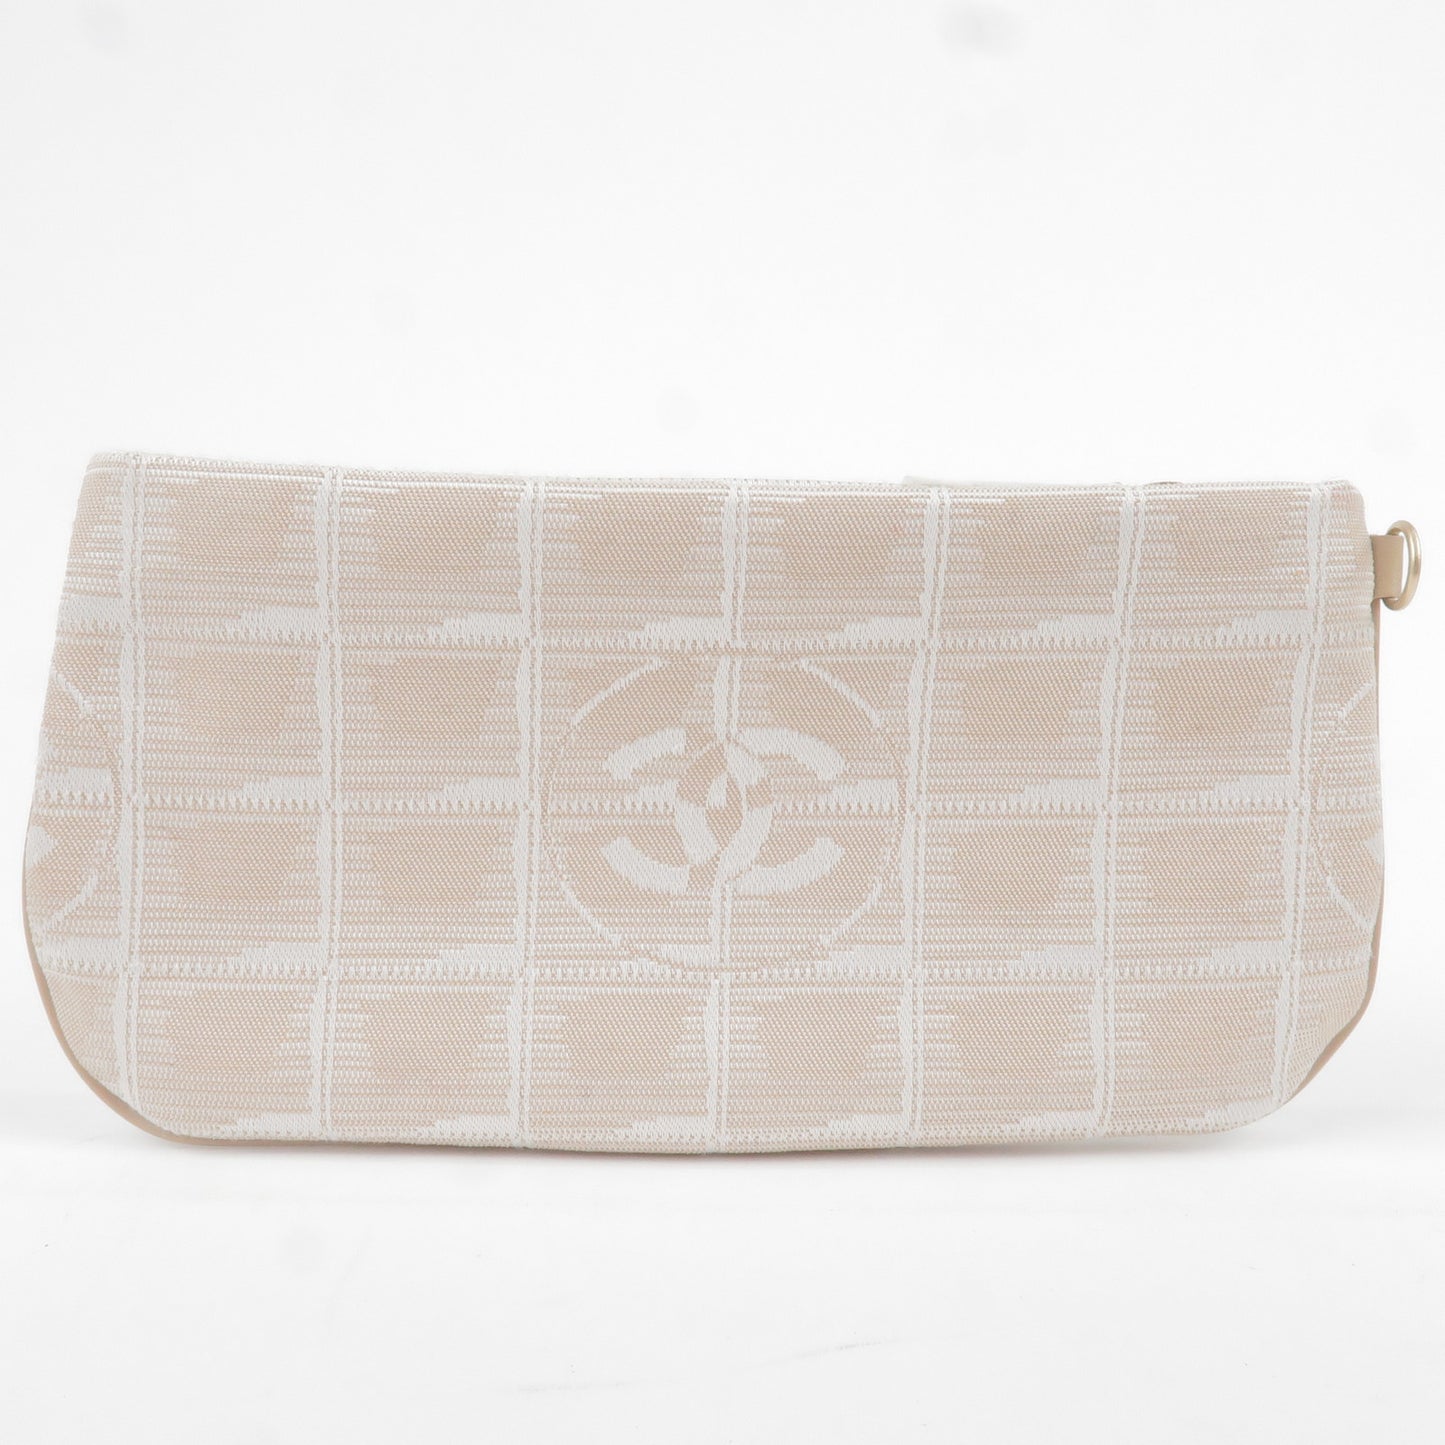 CHANEL Travel Line Nylon Jacquard Leather Pouch Beige A20532